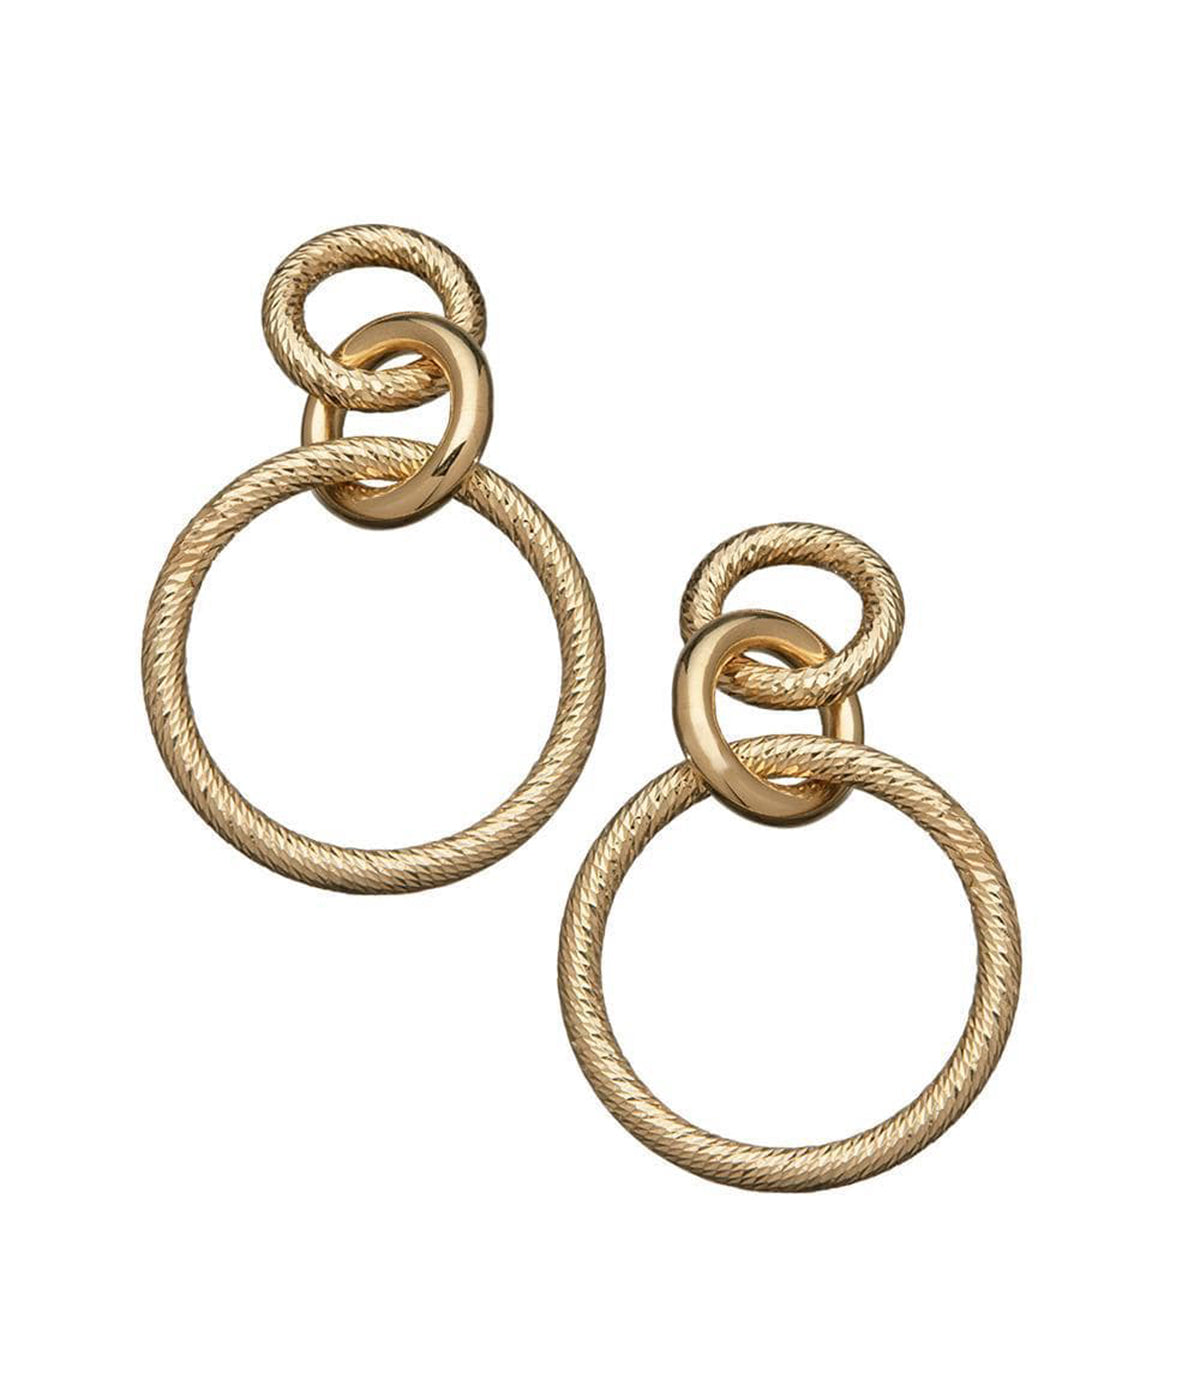 Wes Earrings in Yellow Gold